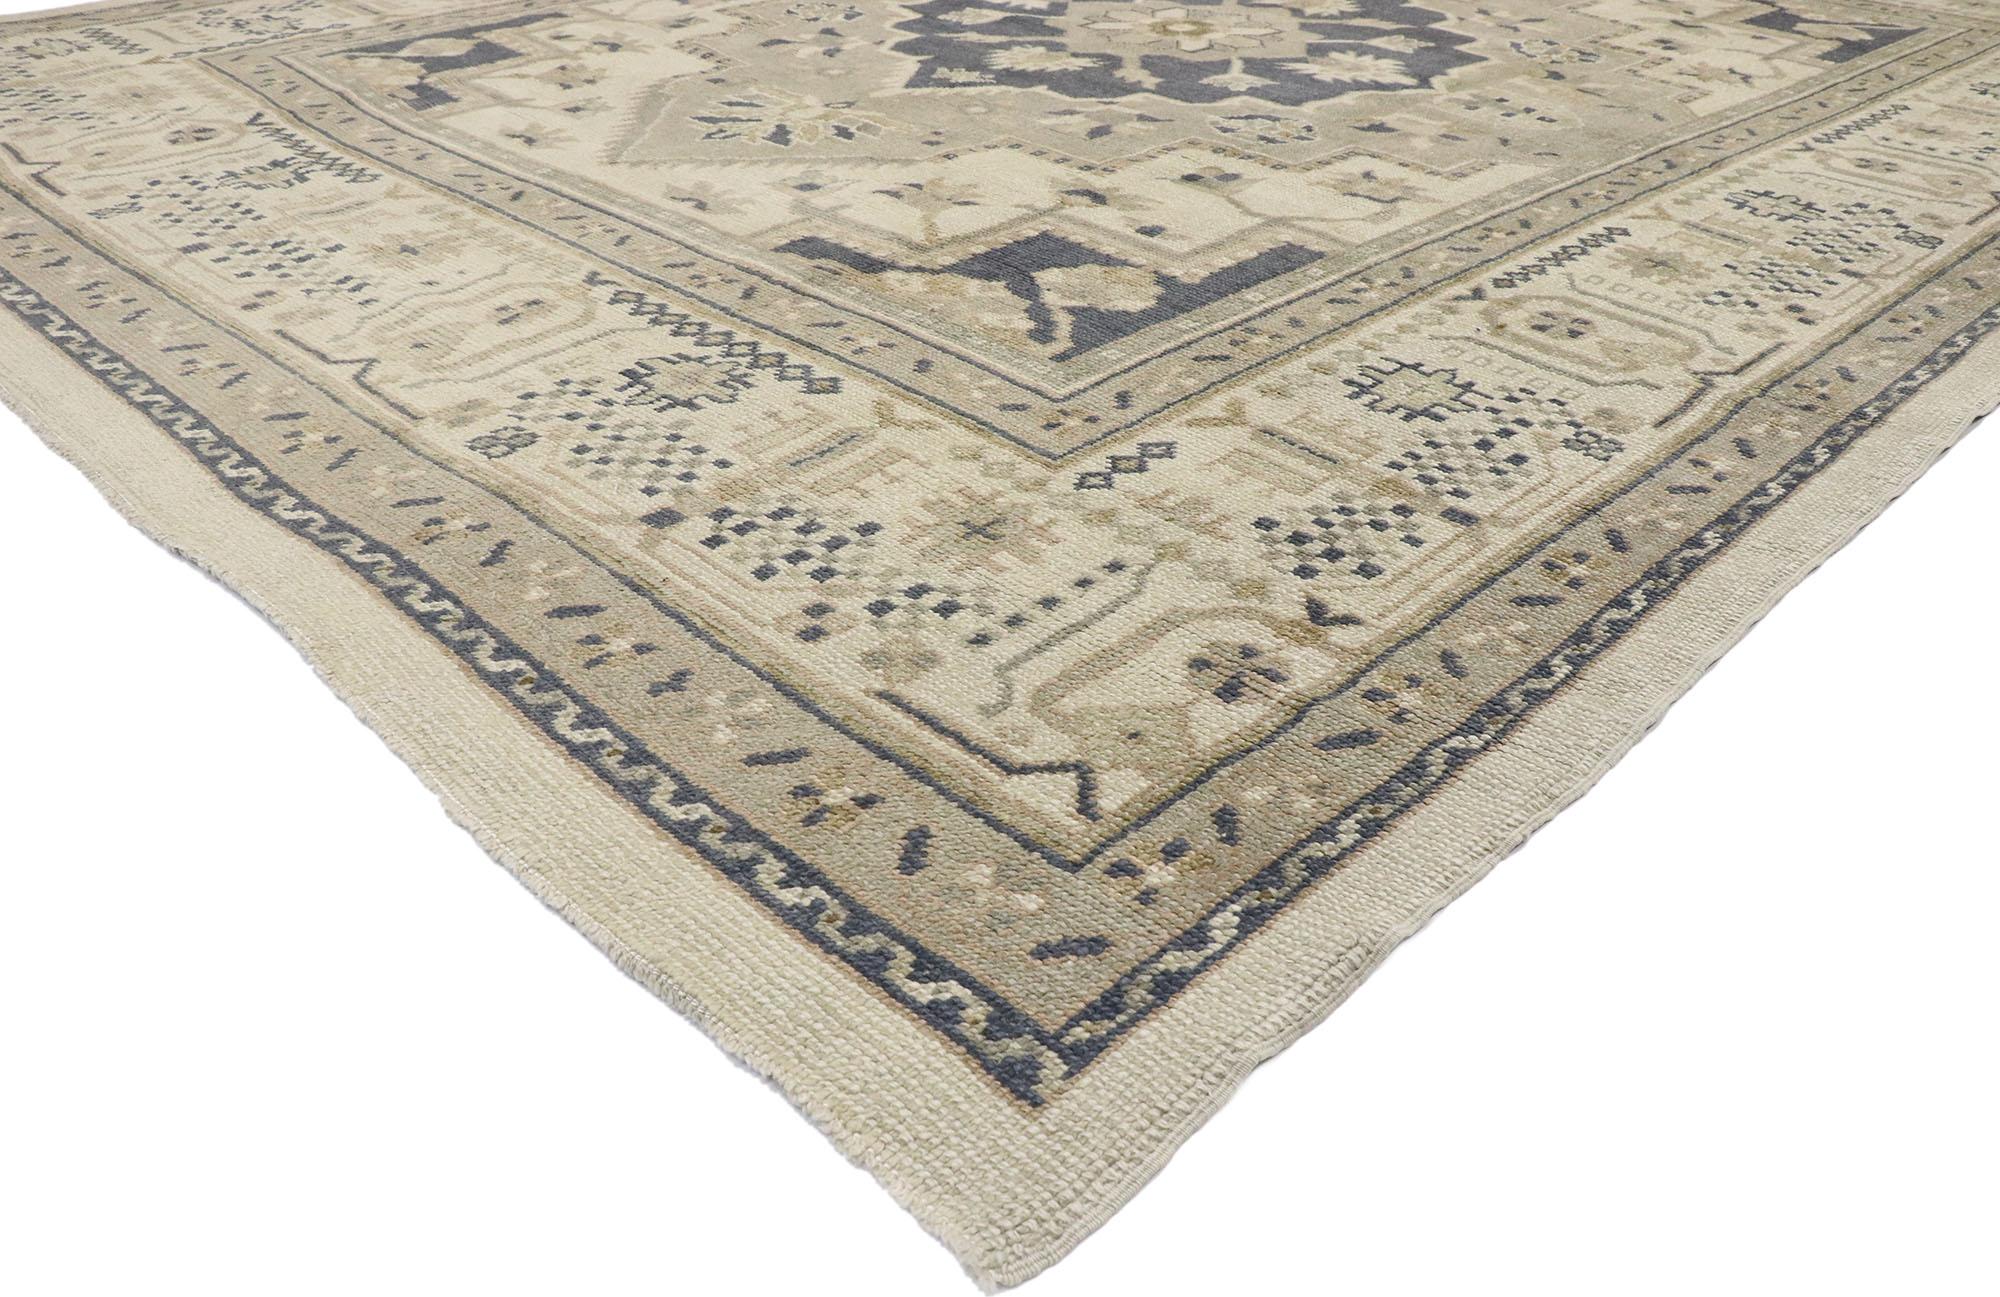 53461, new contemporary Turkish Oushak rug with modern transitional style. Blending elements from the modern world with a tranquil color palette, this hand knotted wool contemporary Turkish Oushak rug is poised to impress. The geometric print and